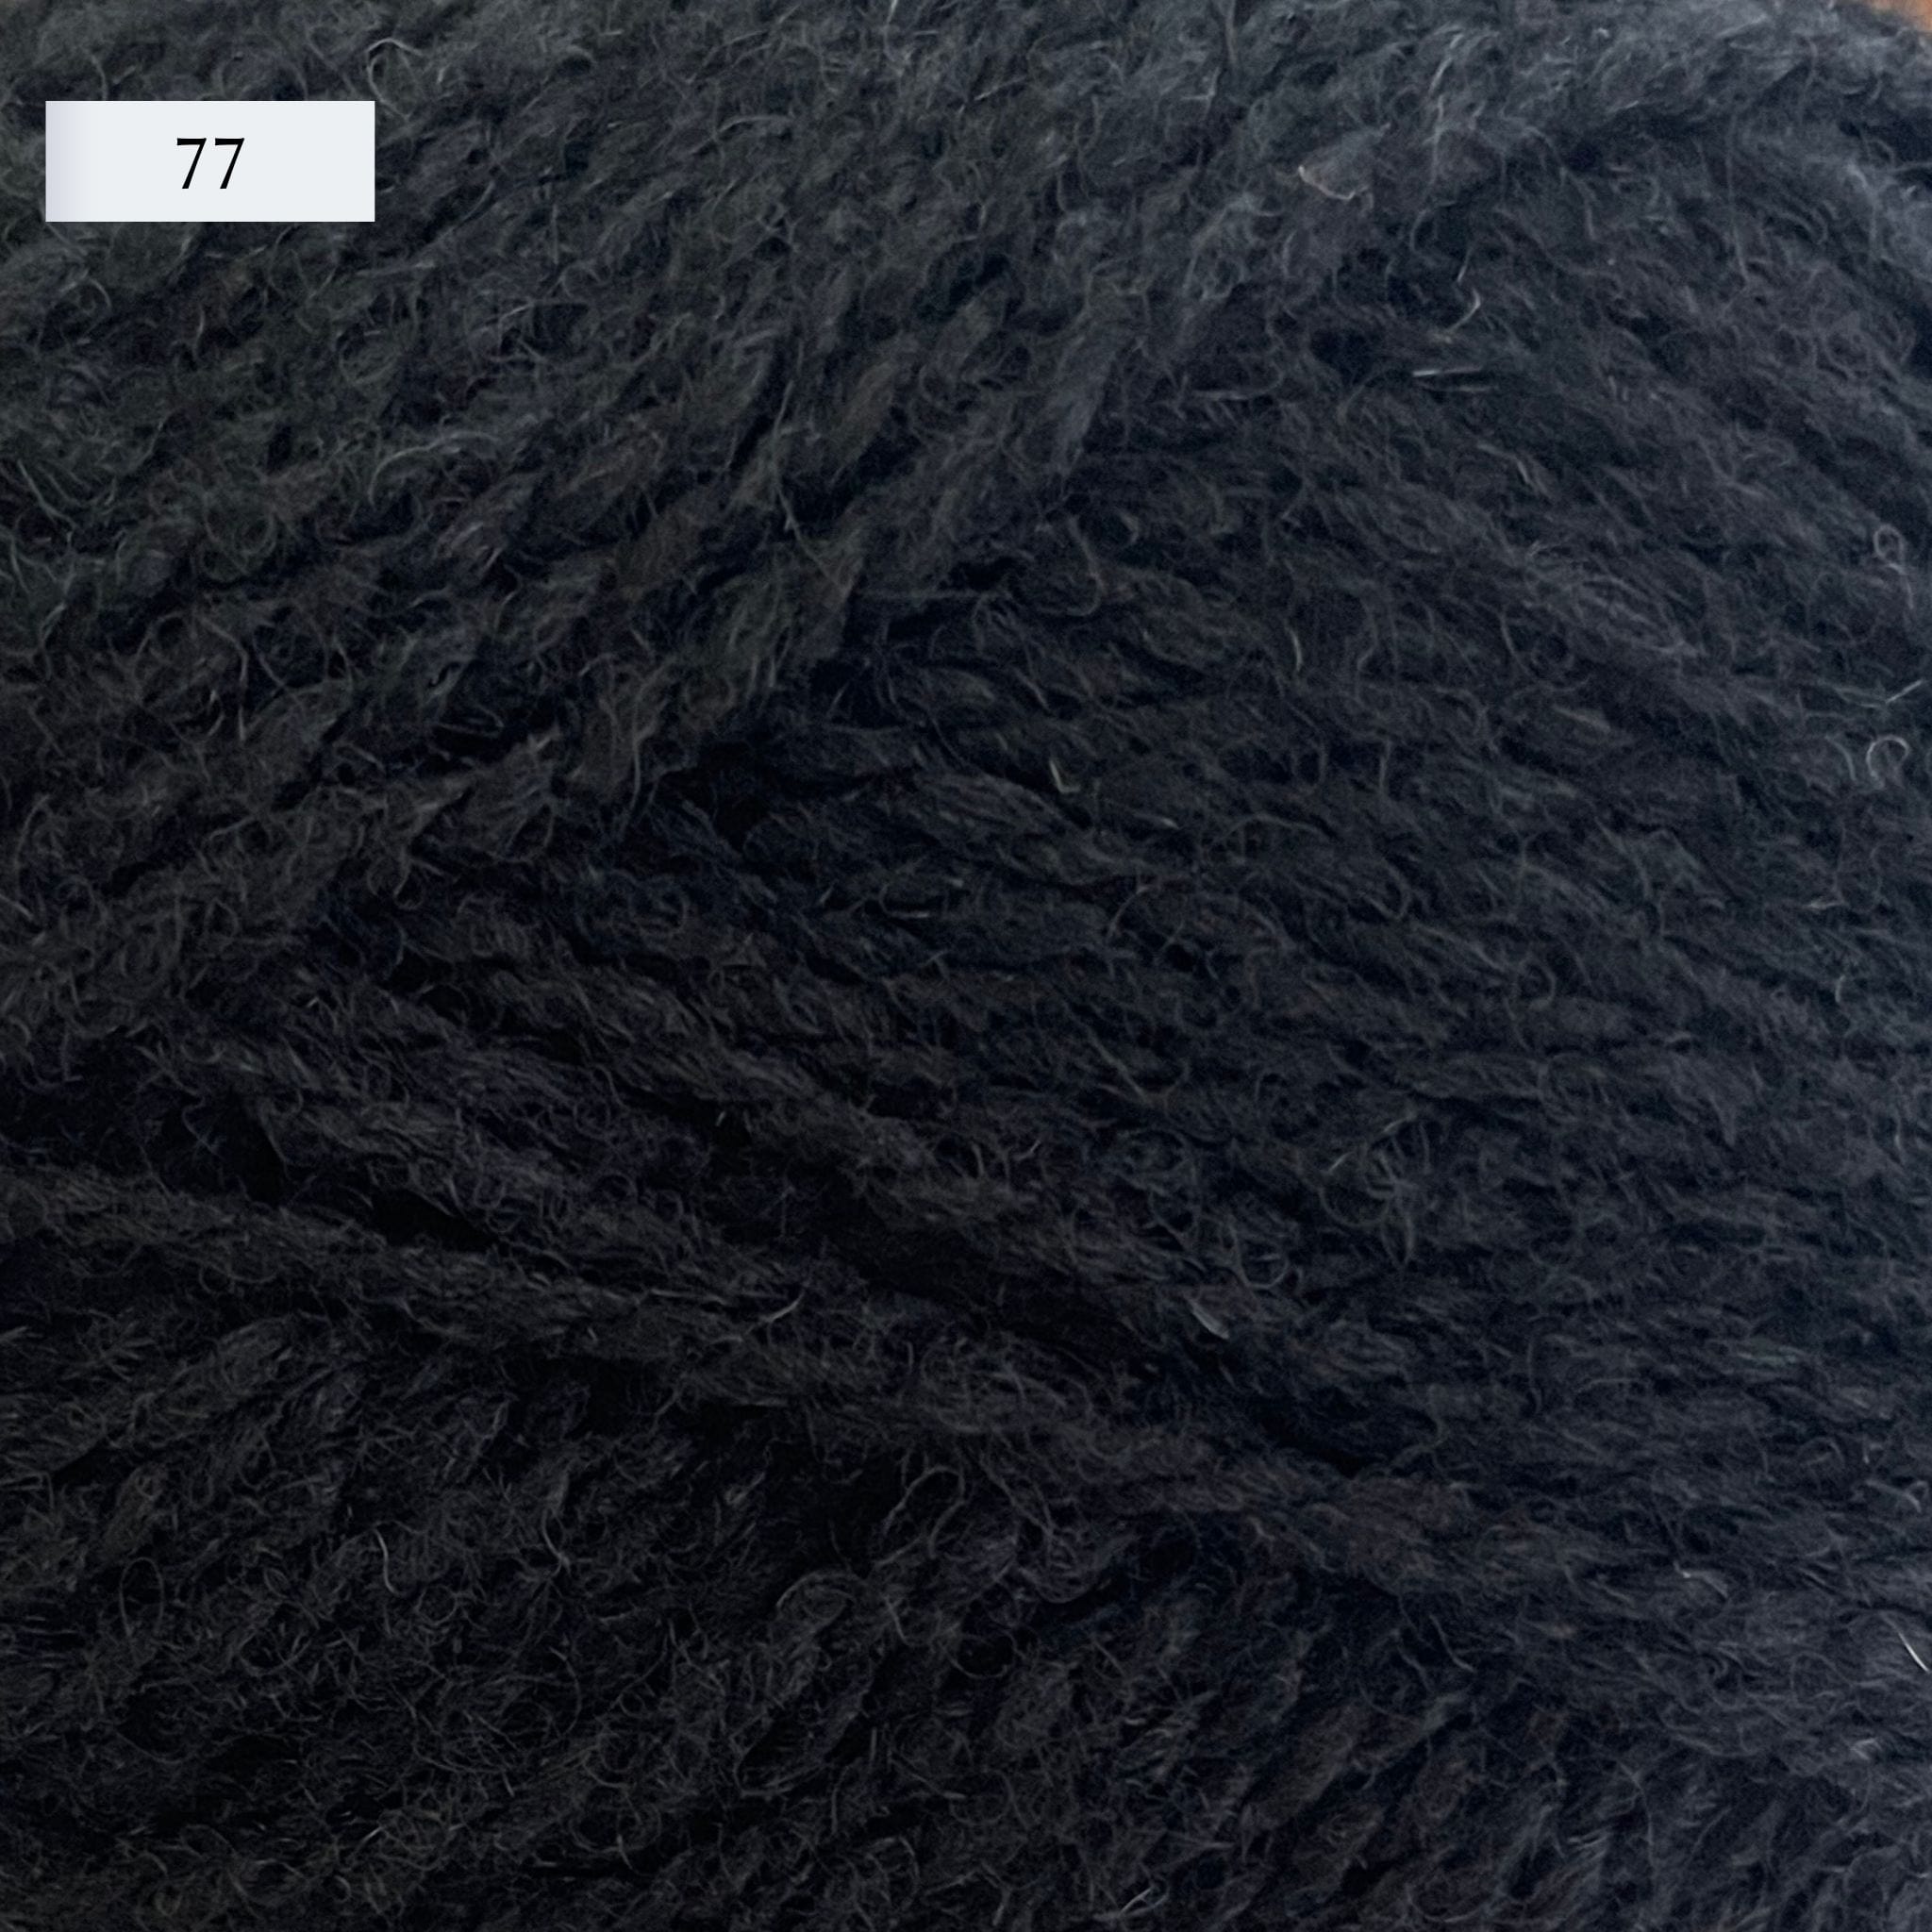 Jamieson & Smith 2ply Jumper Weight, light fingering weight yarn, in color 77, solid black